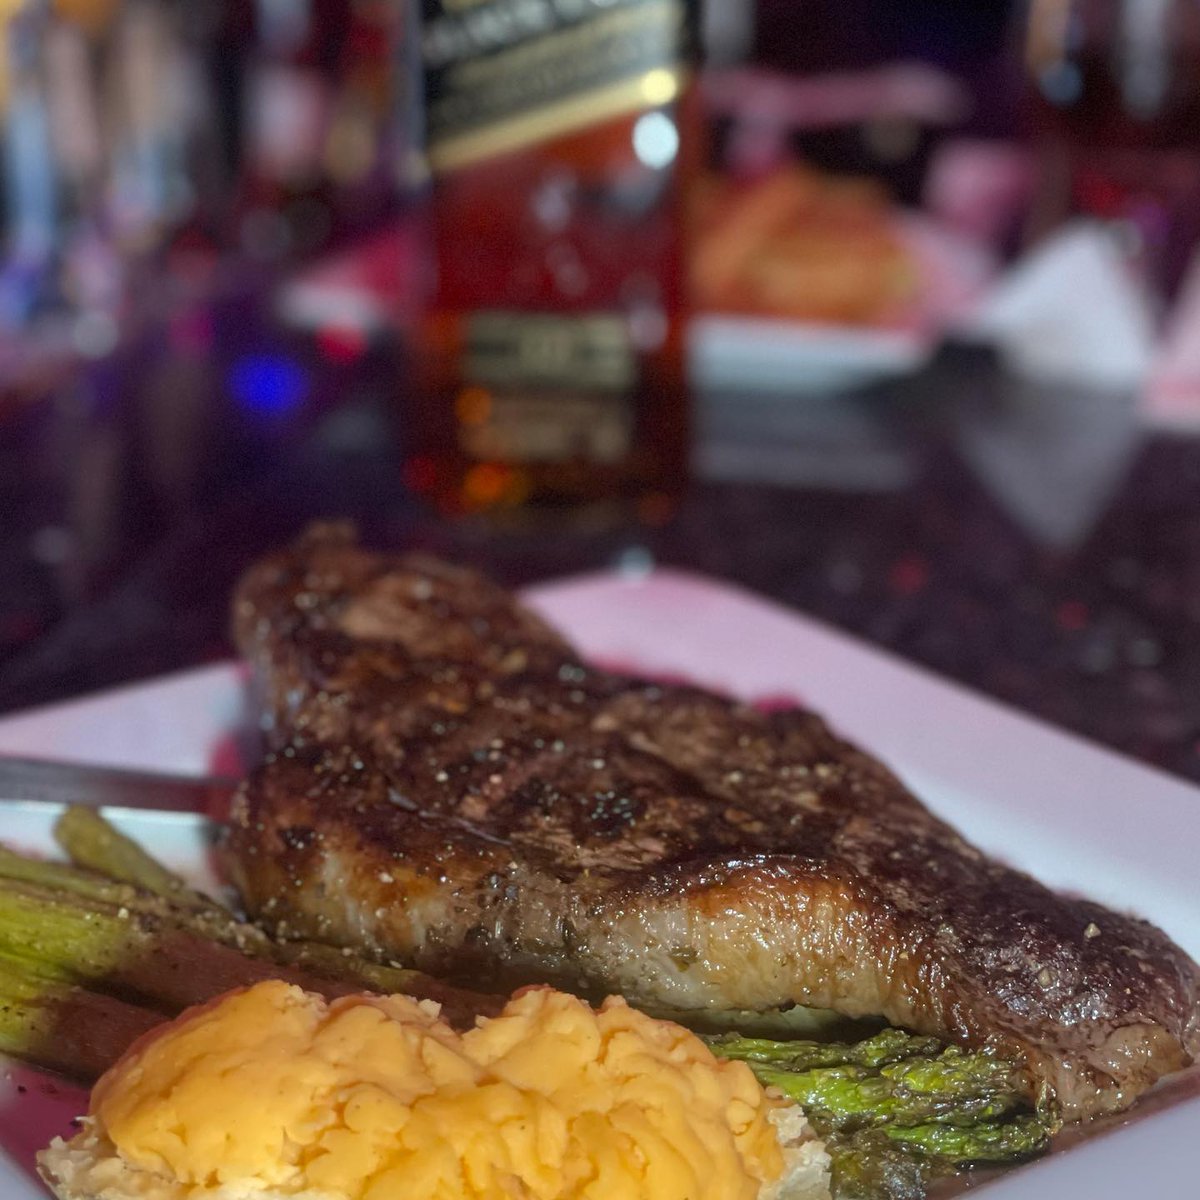 Feel like starting the party ahead of schedule? Dive into a free sirloin steak lunch, compliments of the house!
#happyhour #freelunch #scarlettscabaret